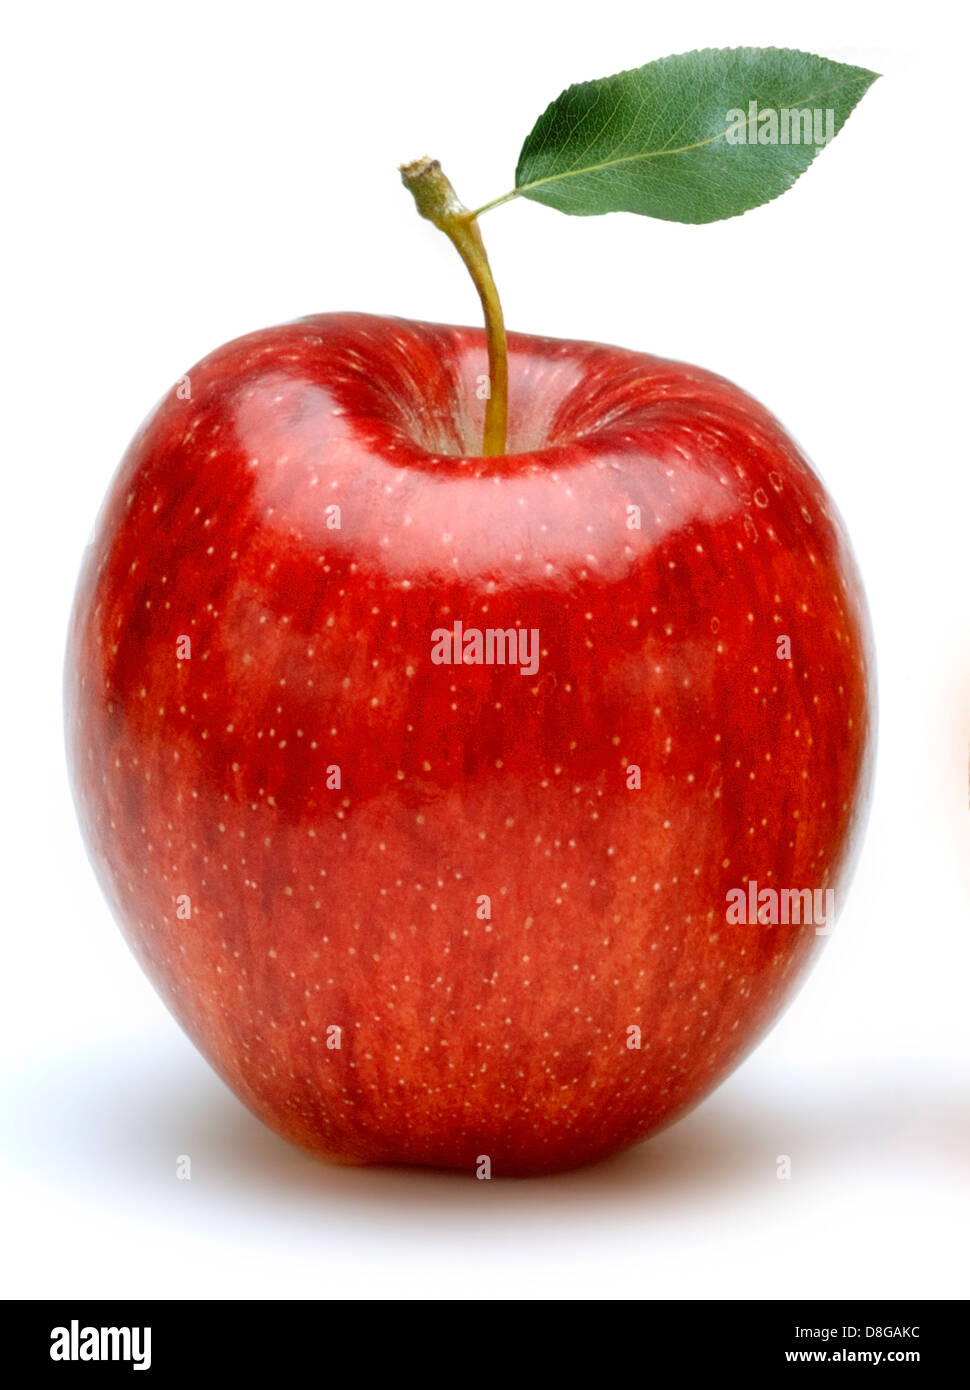 apple with leaf Stock Photo